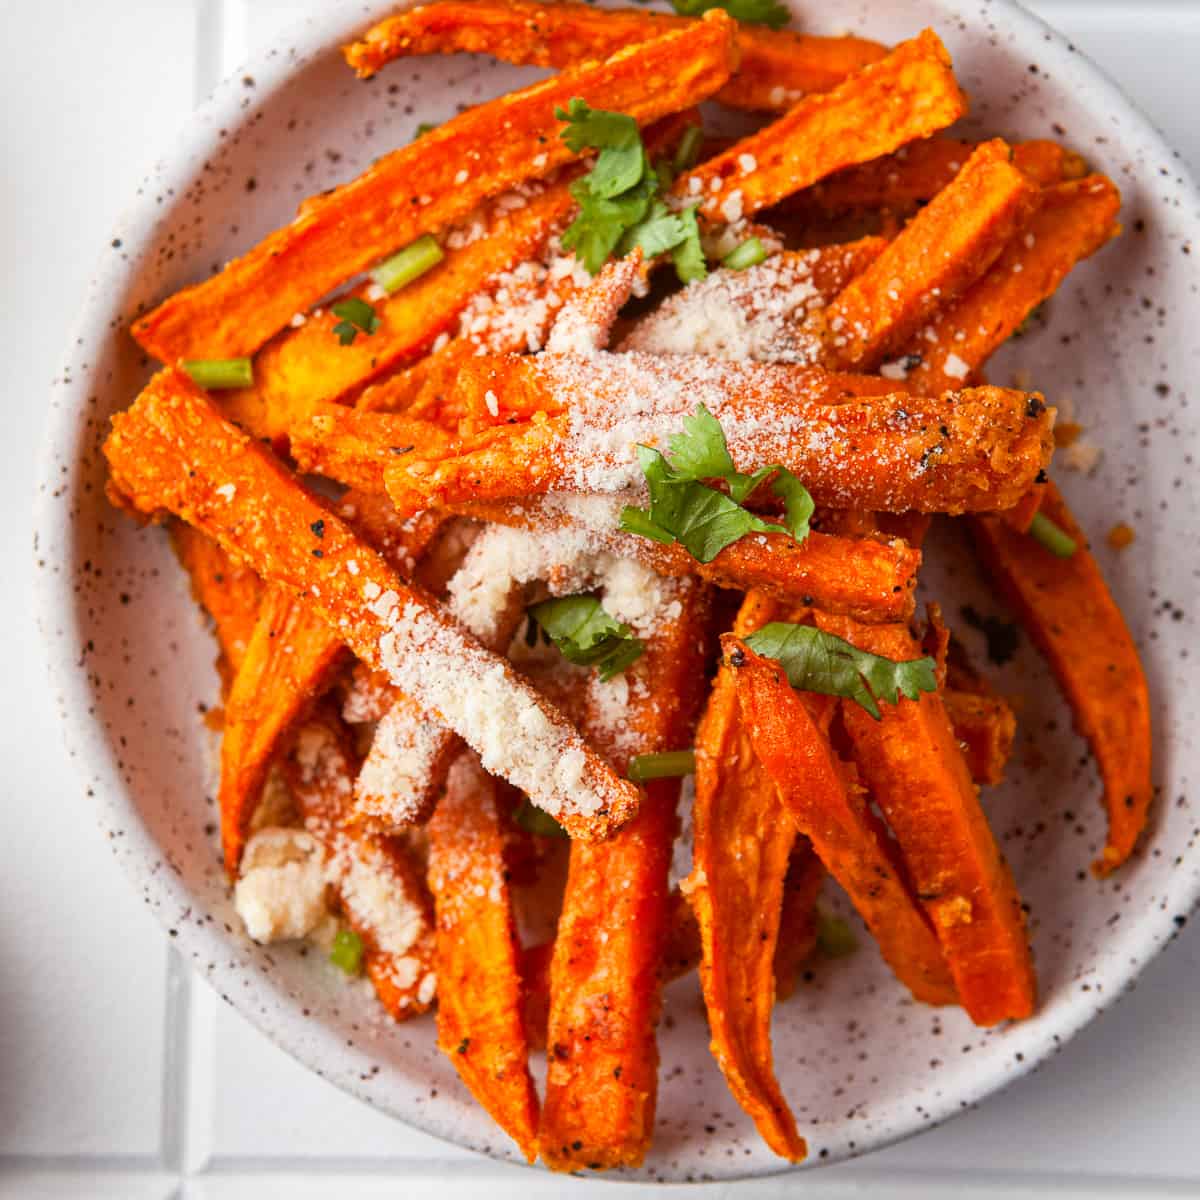 Baked Spiralized Sweet Potato Fries with Garlic and Parsley - Know